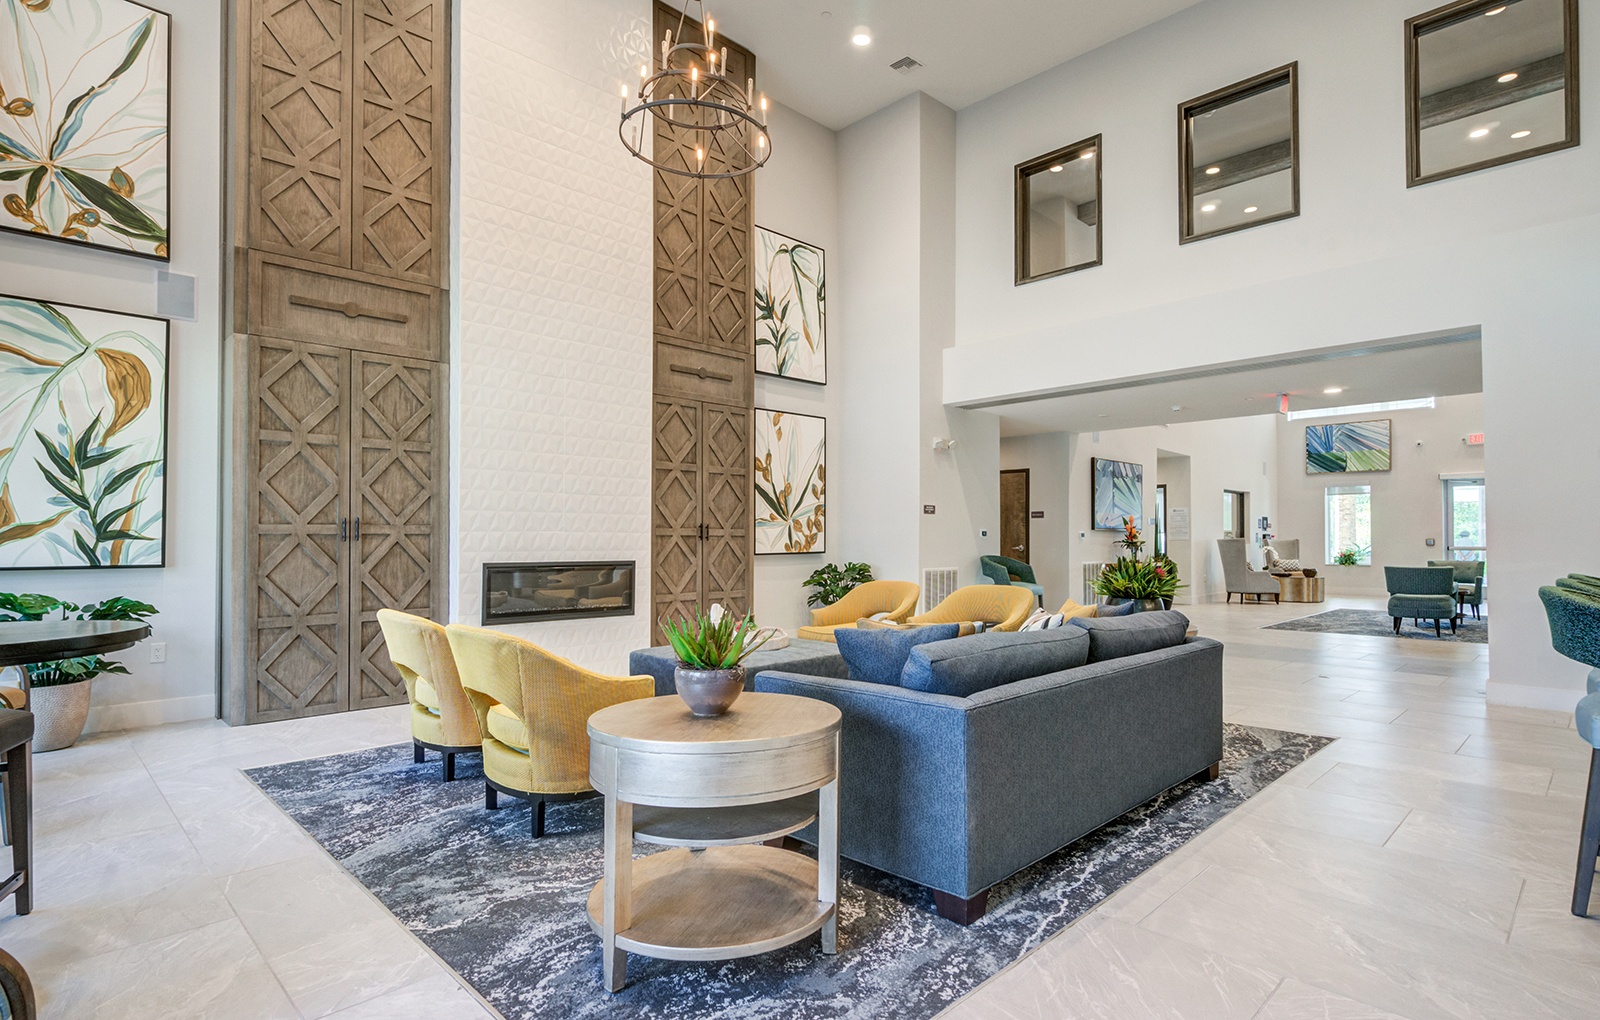 the preserve at ballantyne commons living room with couches and chairs